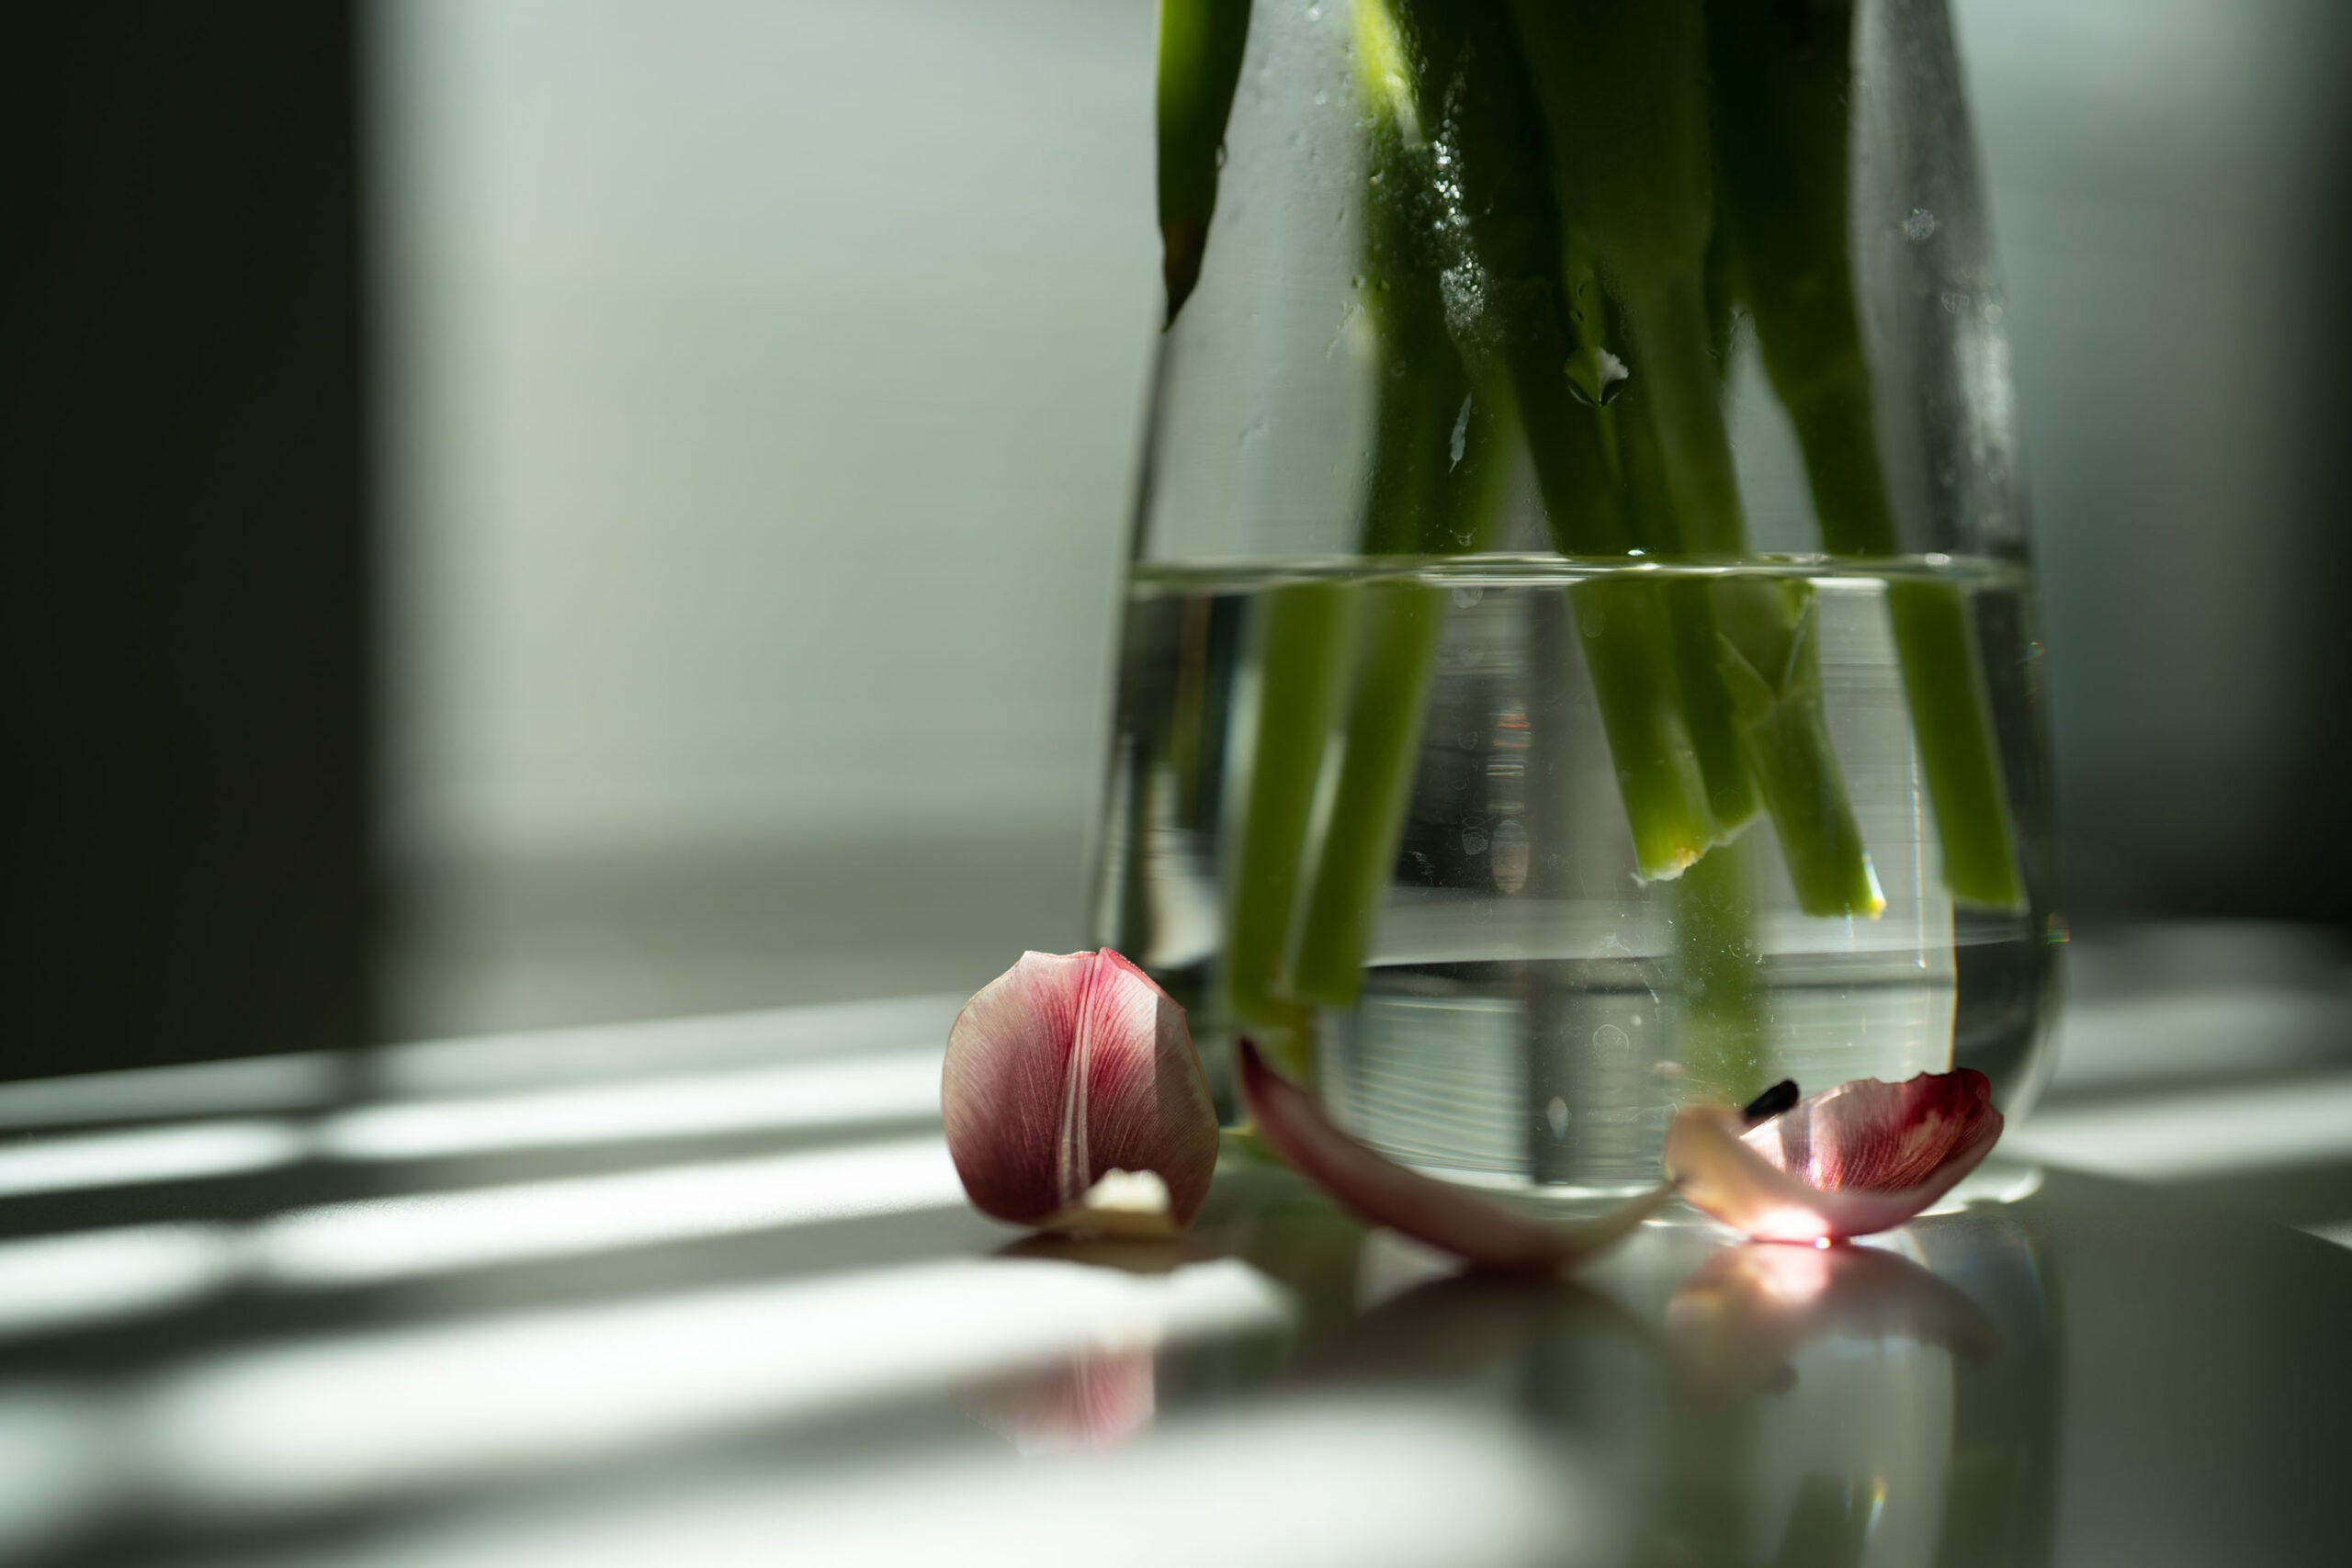 Tulip petals on a counter next to a glass vase